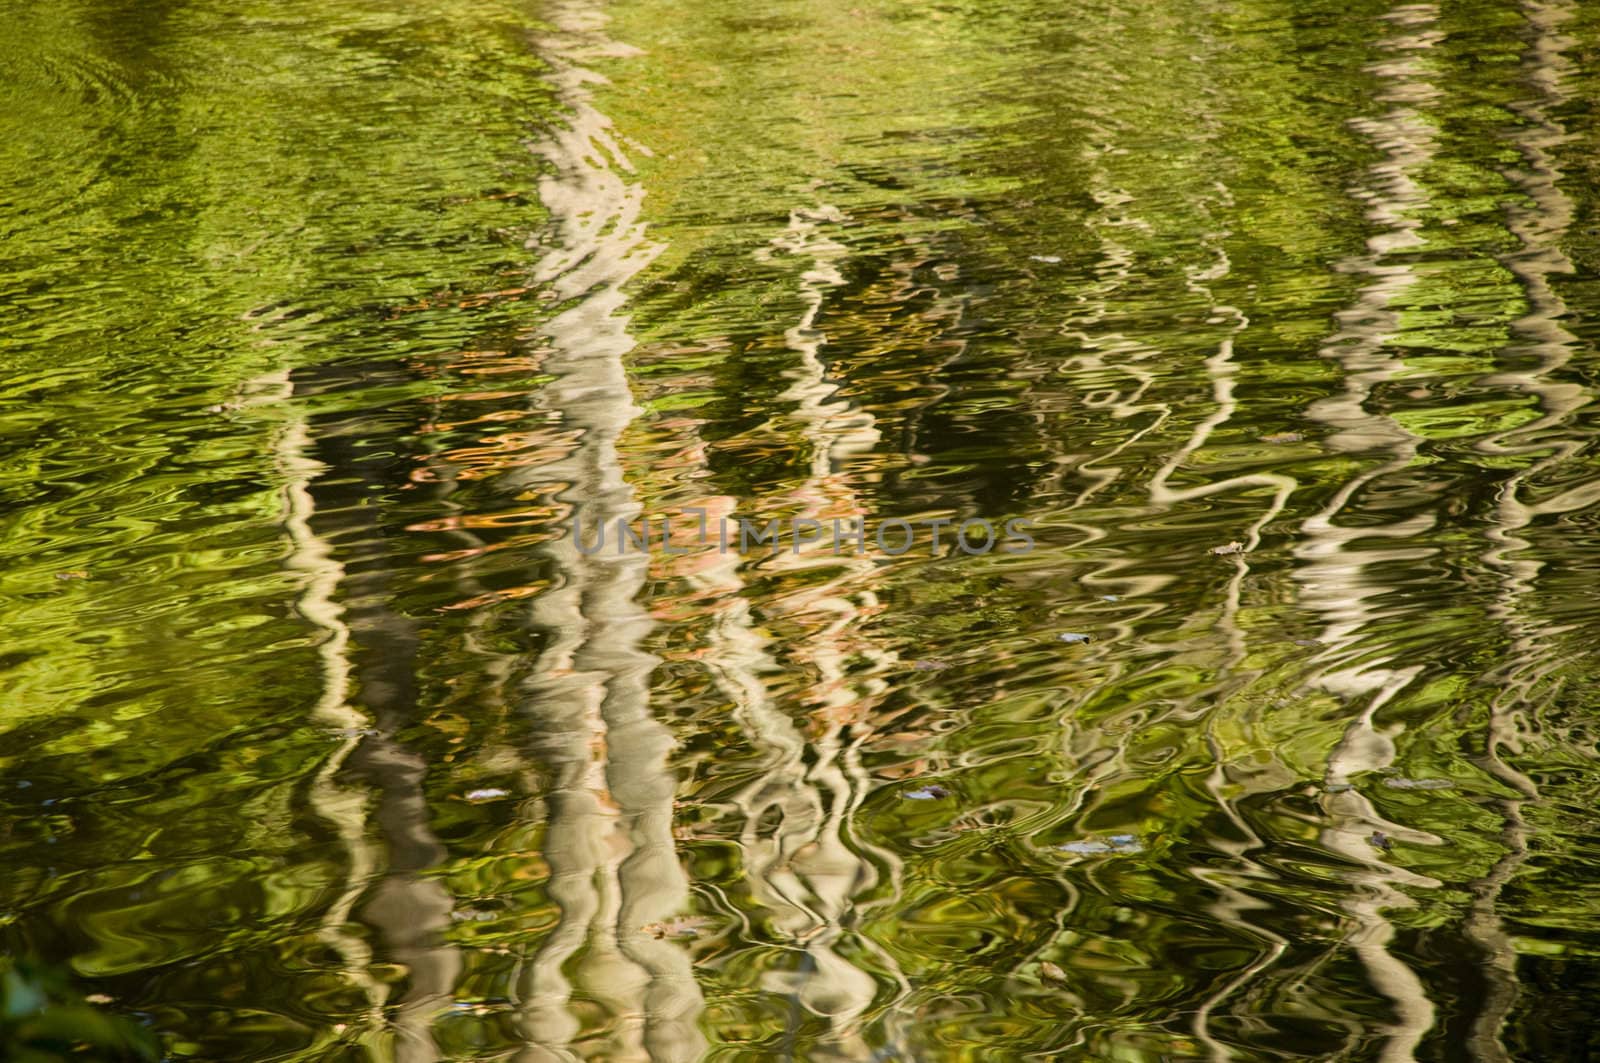 Abstract rippled reflection of trees in lake water. Would make a good background.